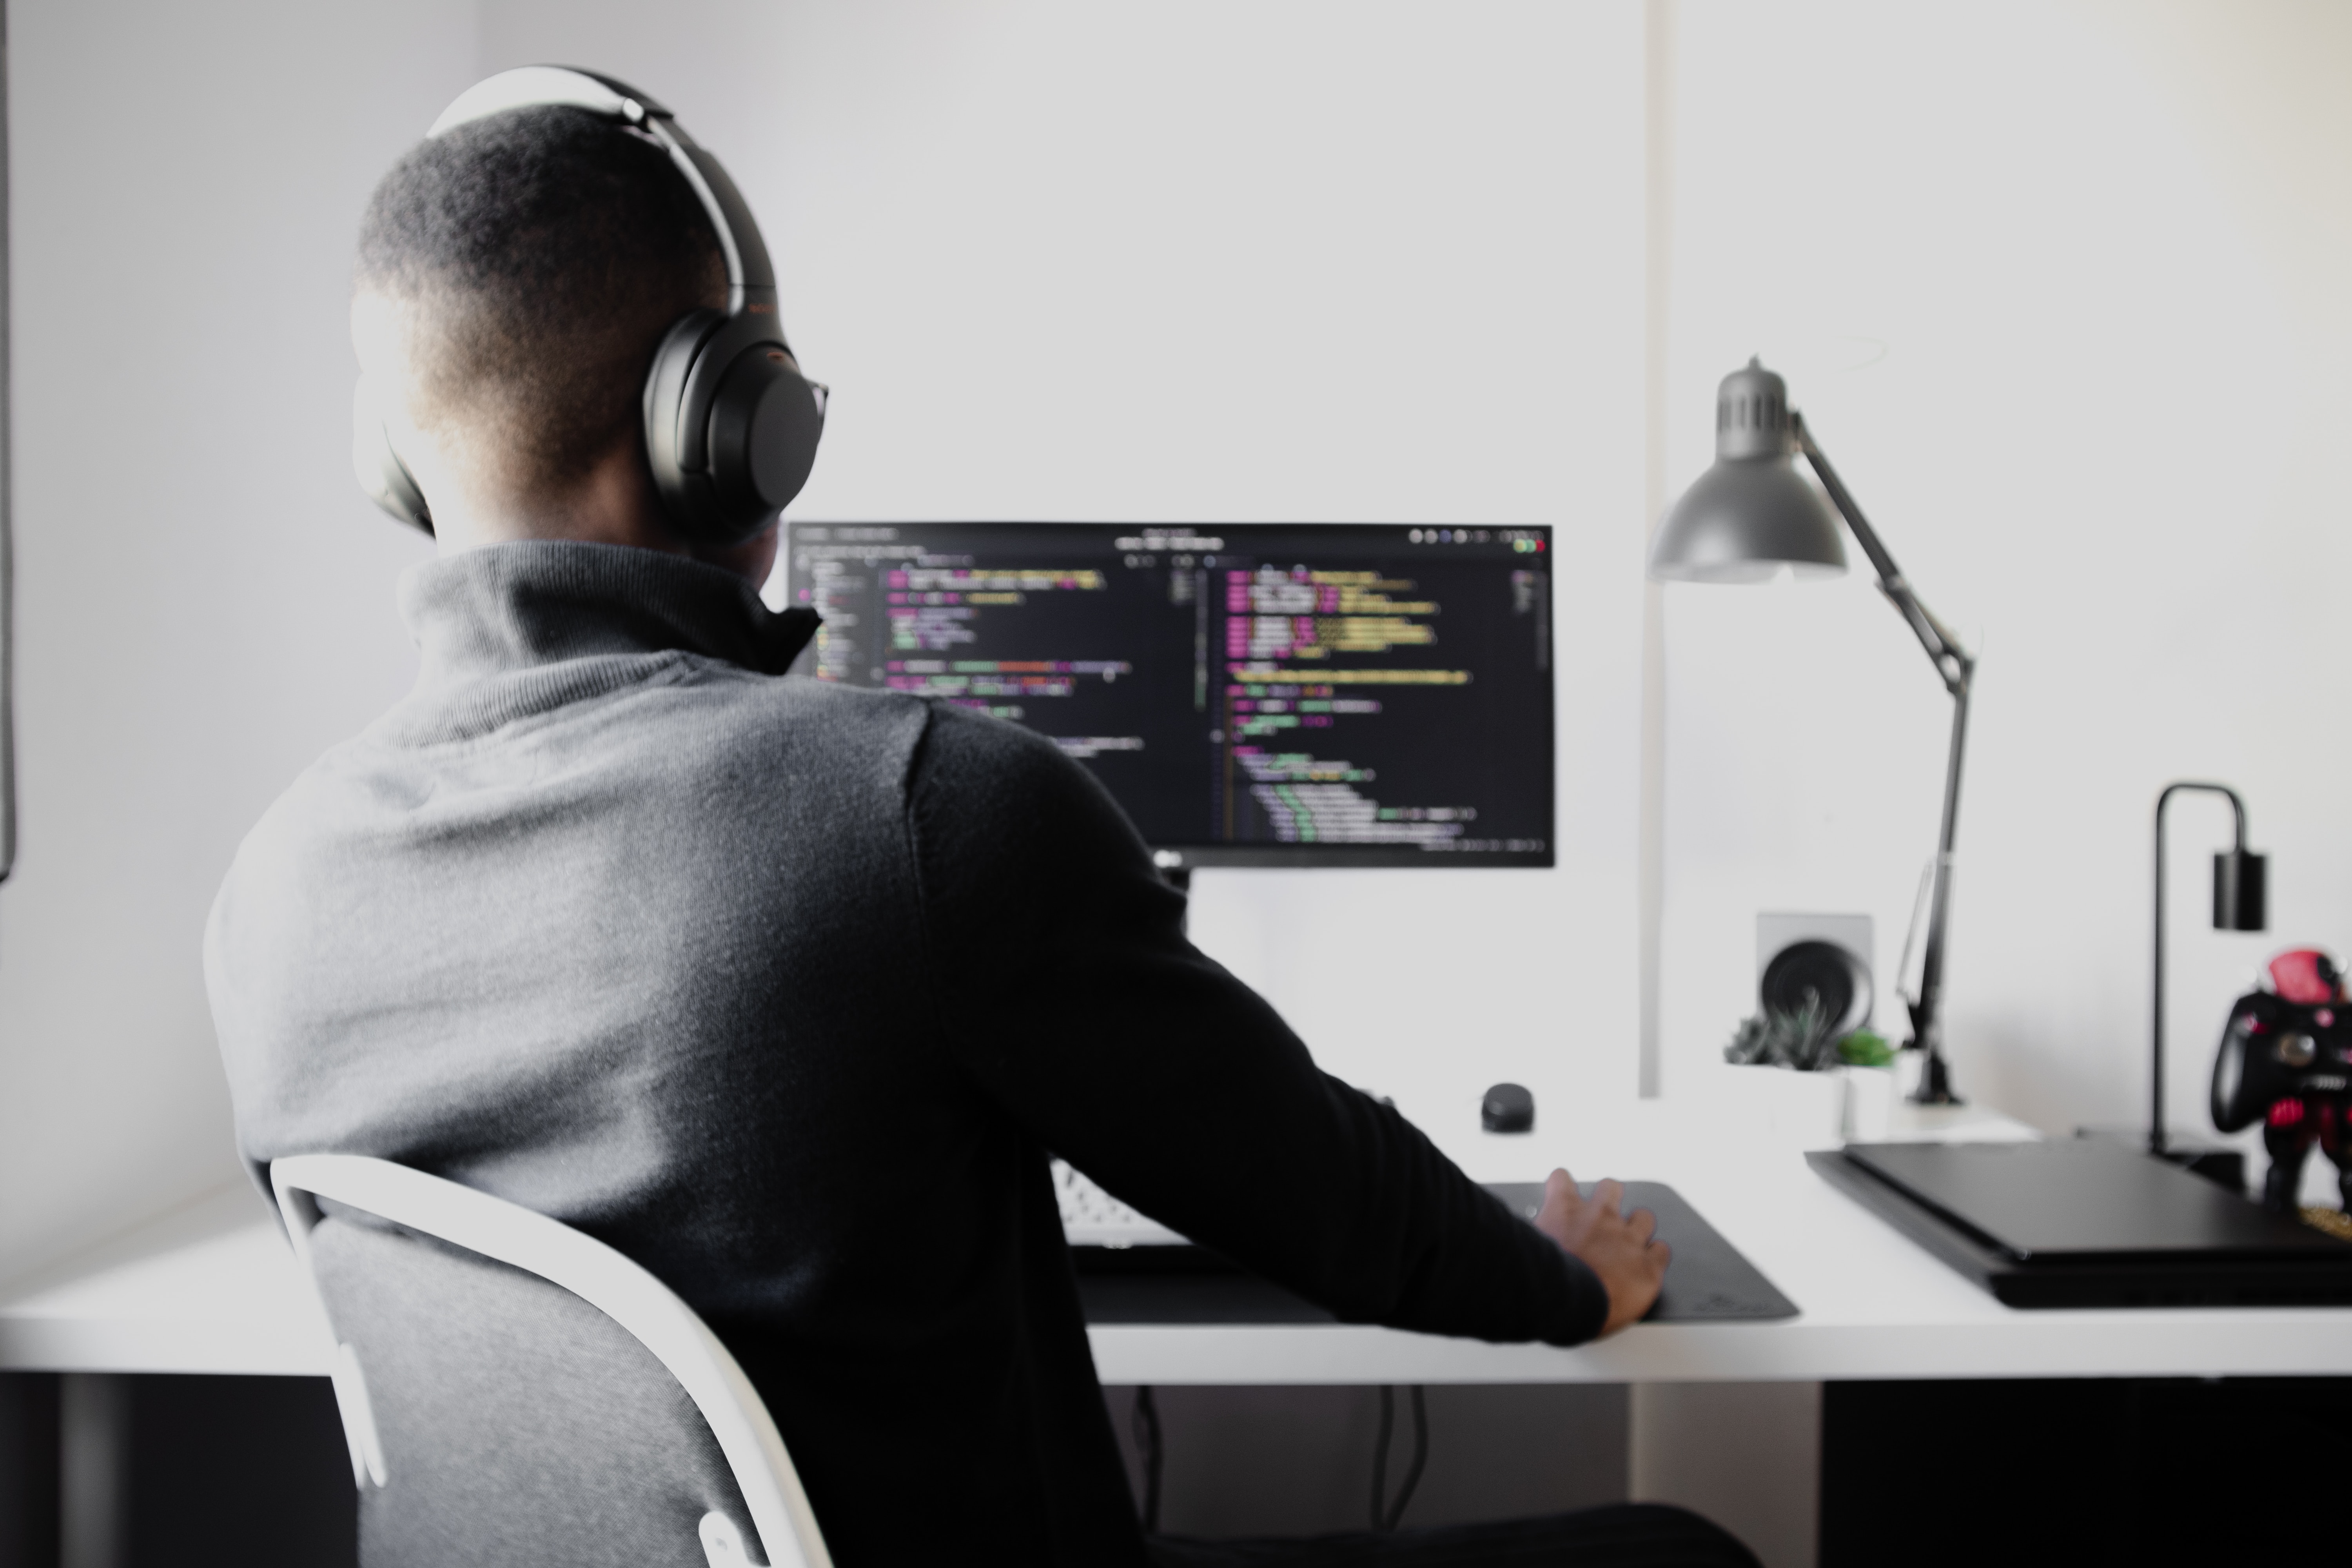 Man with headphones on at computer coding